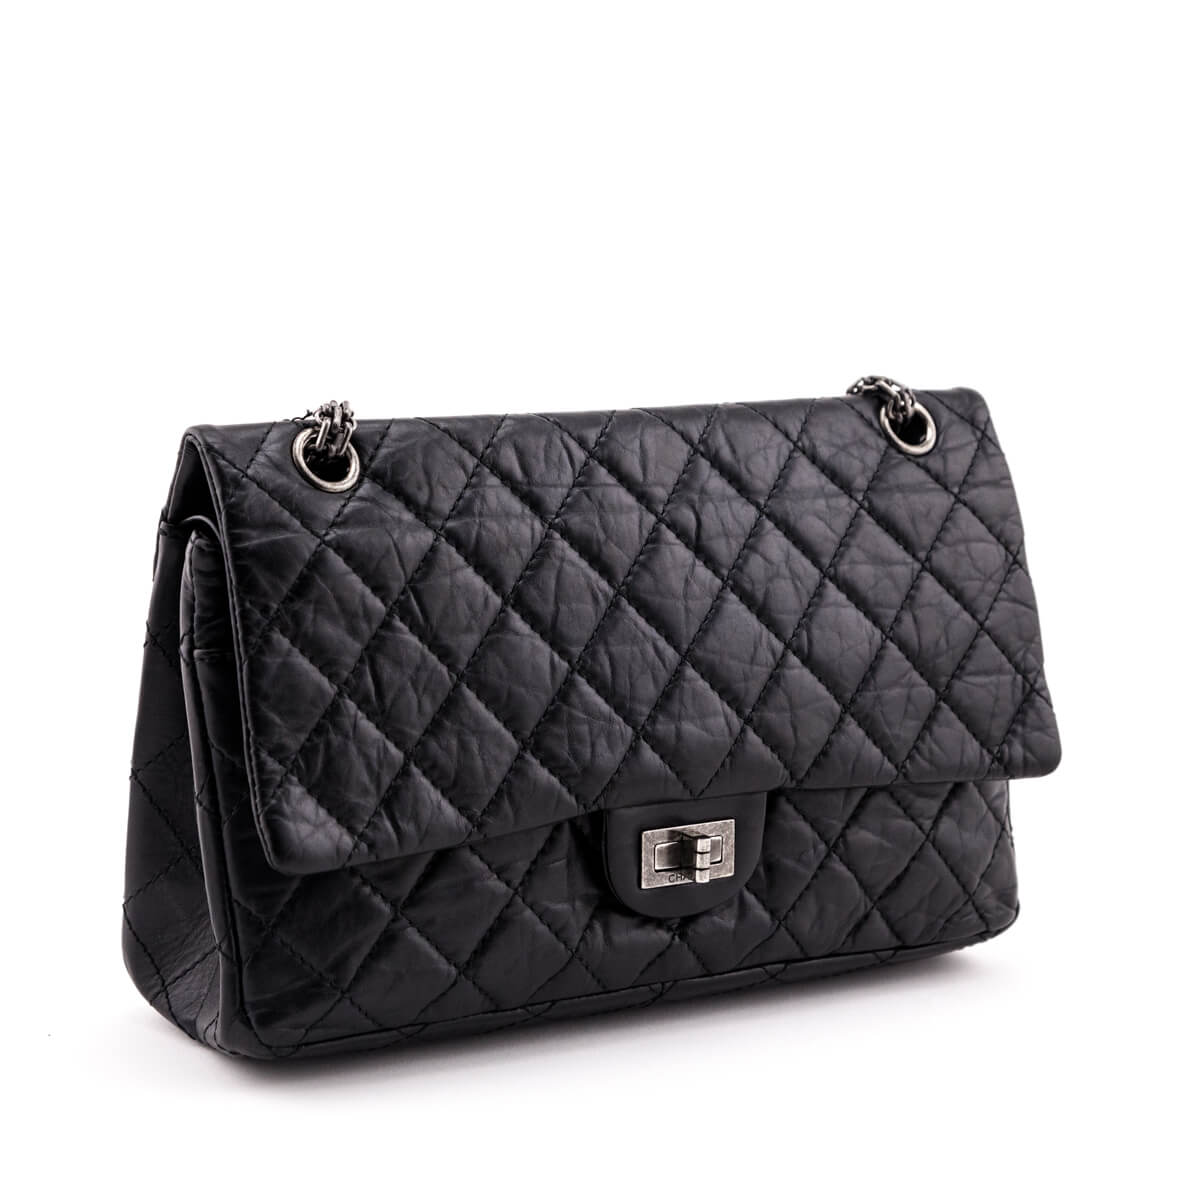 CHANEL GOLD 2.55 REISSUE QUILTED CLASSIC CALFSKIN - Monkee's of Myrtle Beach